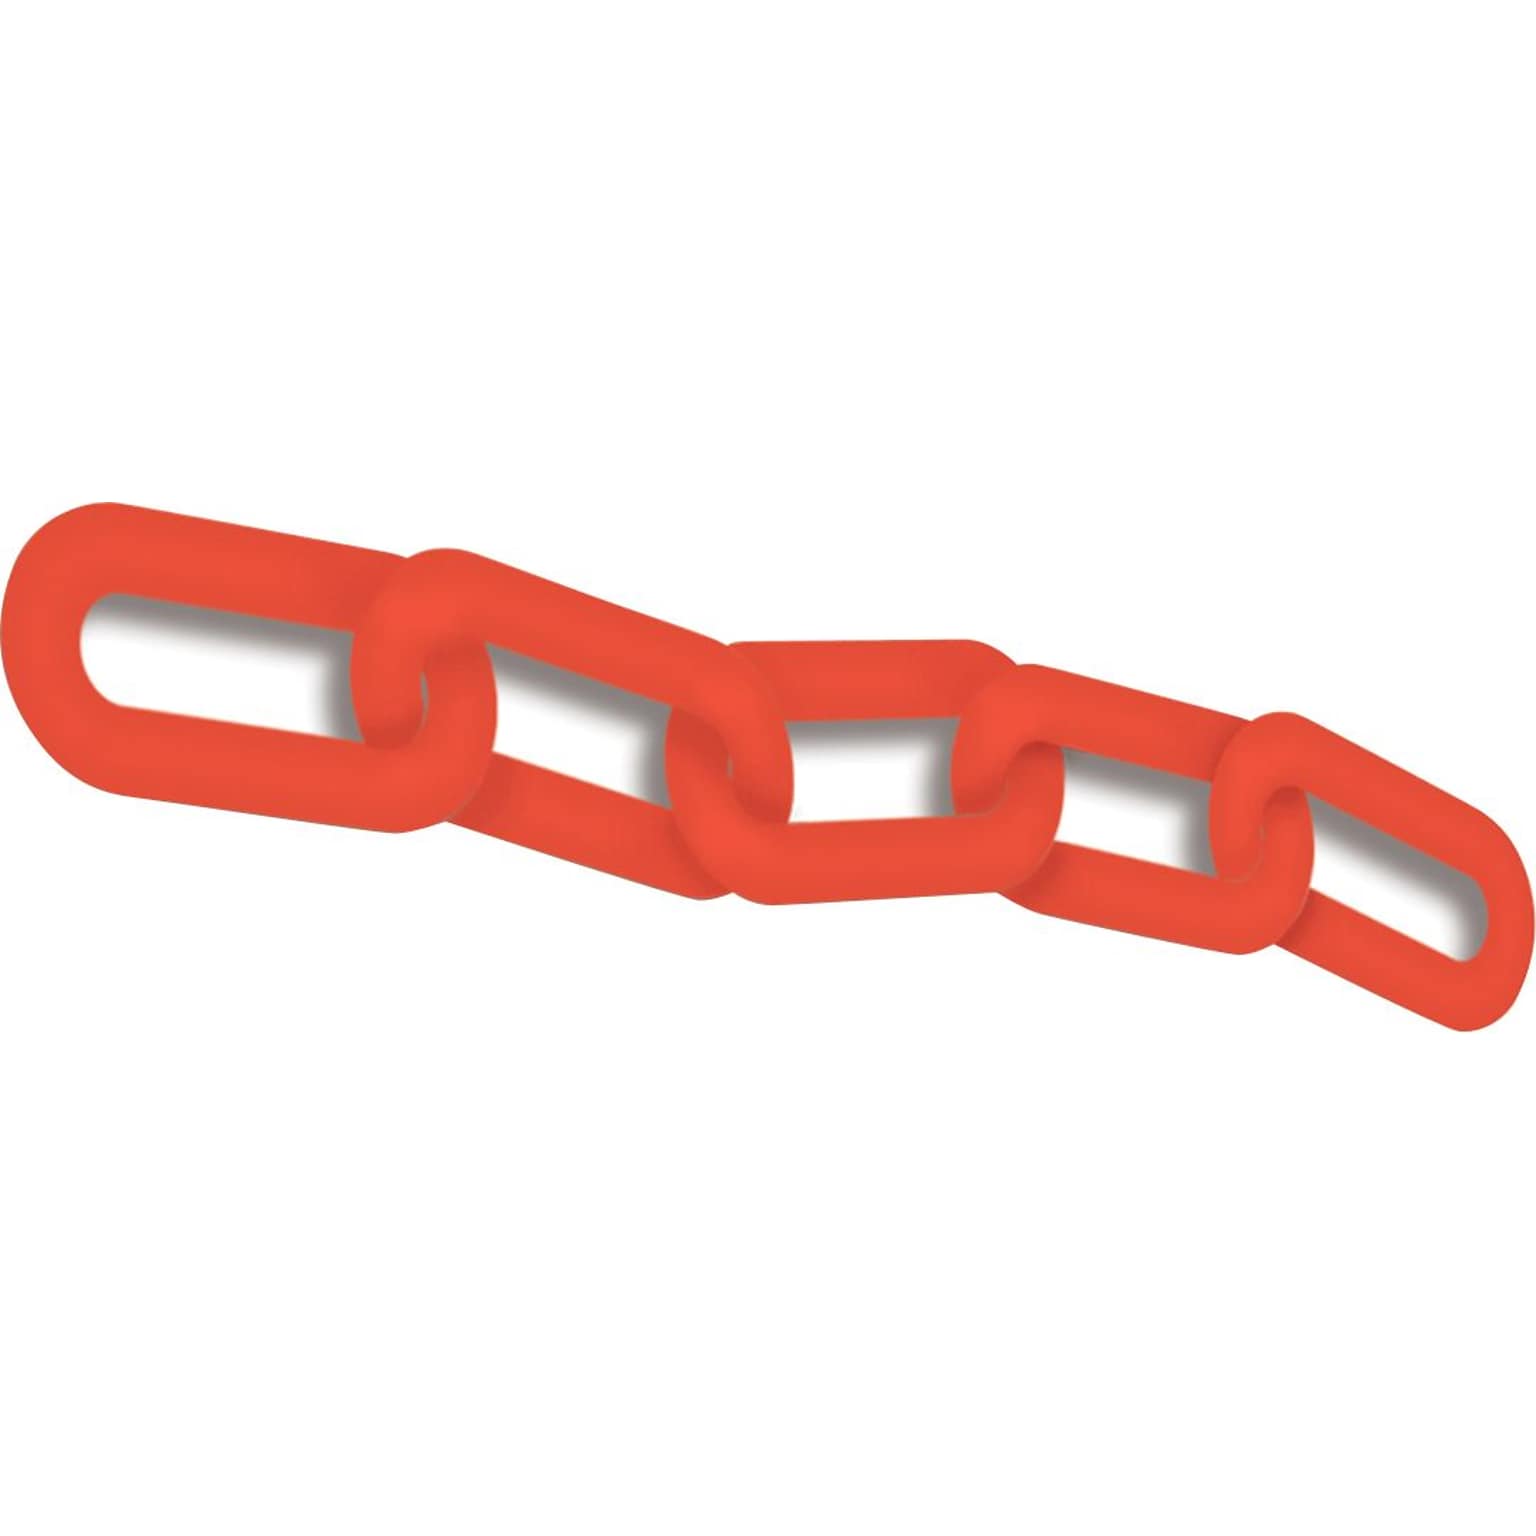 Accuform Plastic Chain for Use with BLOCKADE Stanchion Posts, 100, Red (PRC211RD)